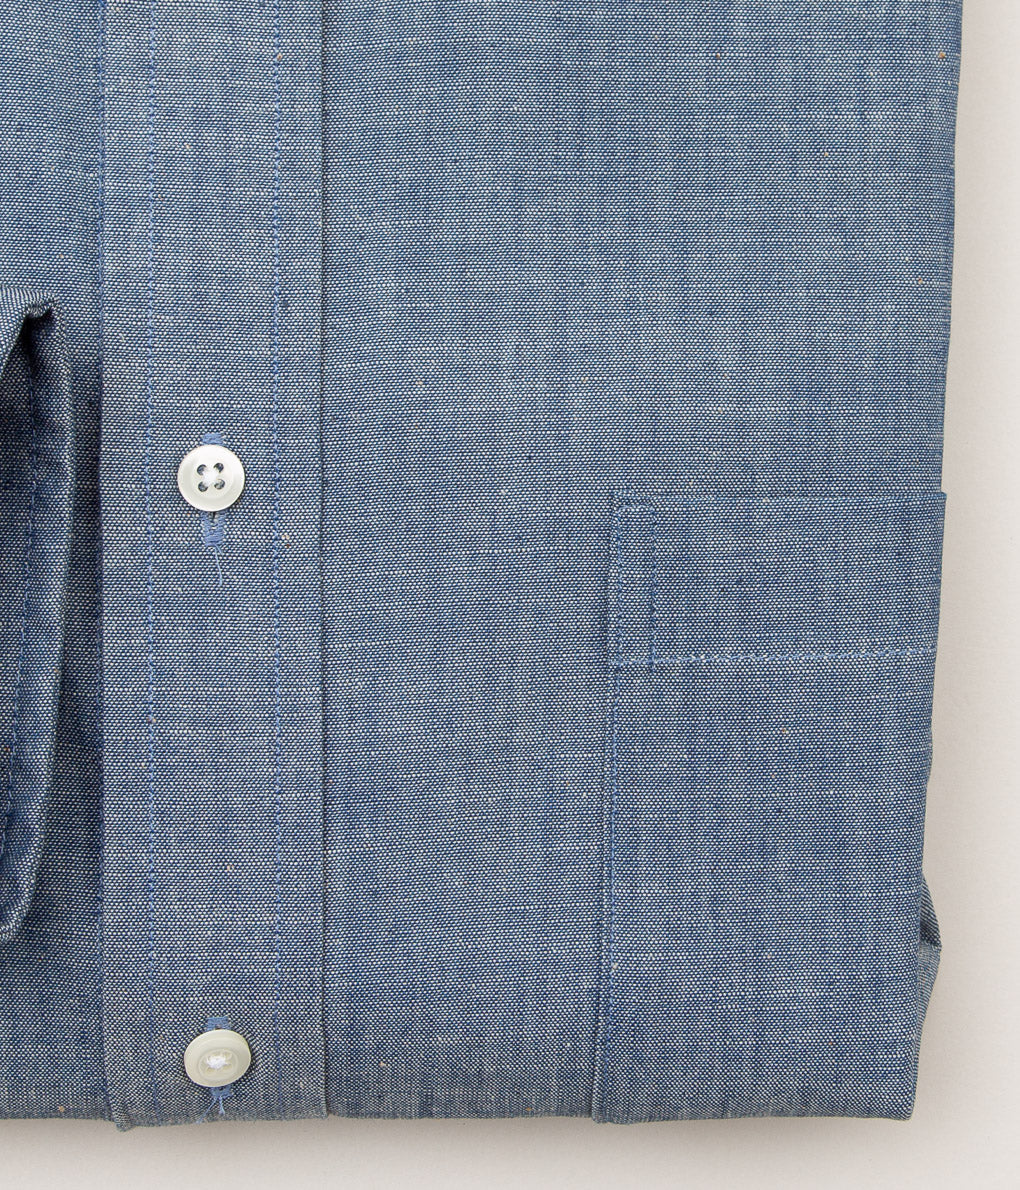 INDIVIDUALIZED SHIRTS "RIGID CHAMBRAY CLASSIC FIT BUTTON DOWN SHIRT"(BLUE)